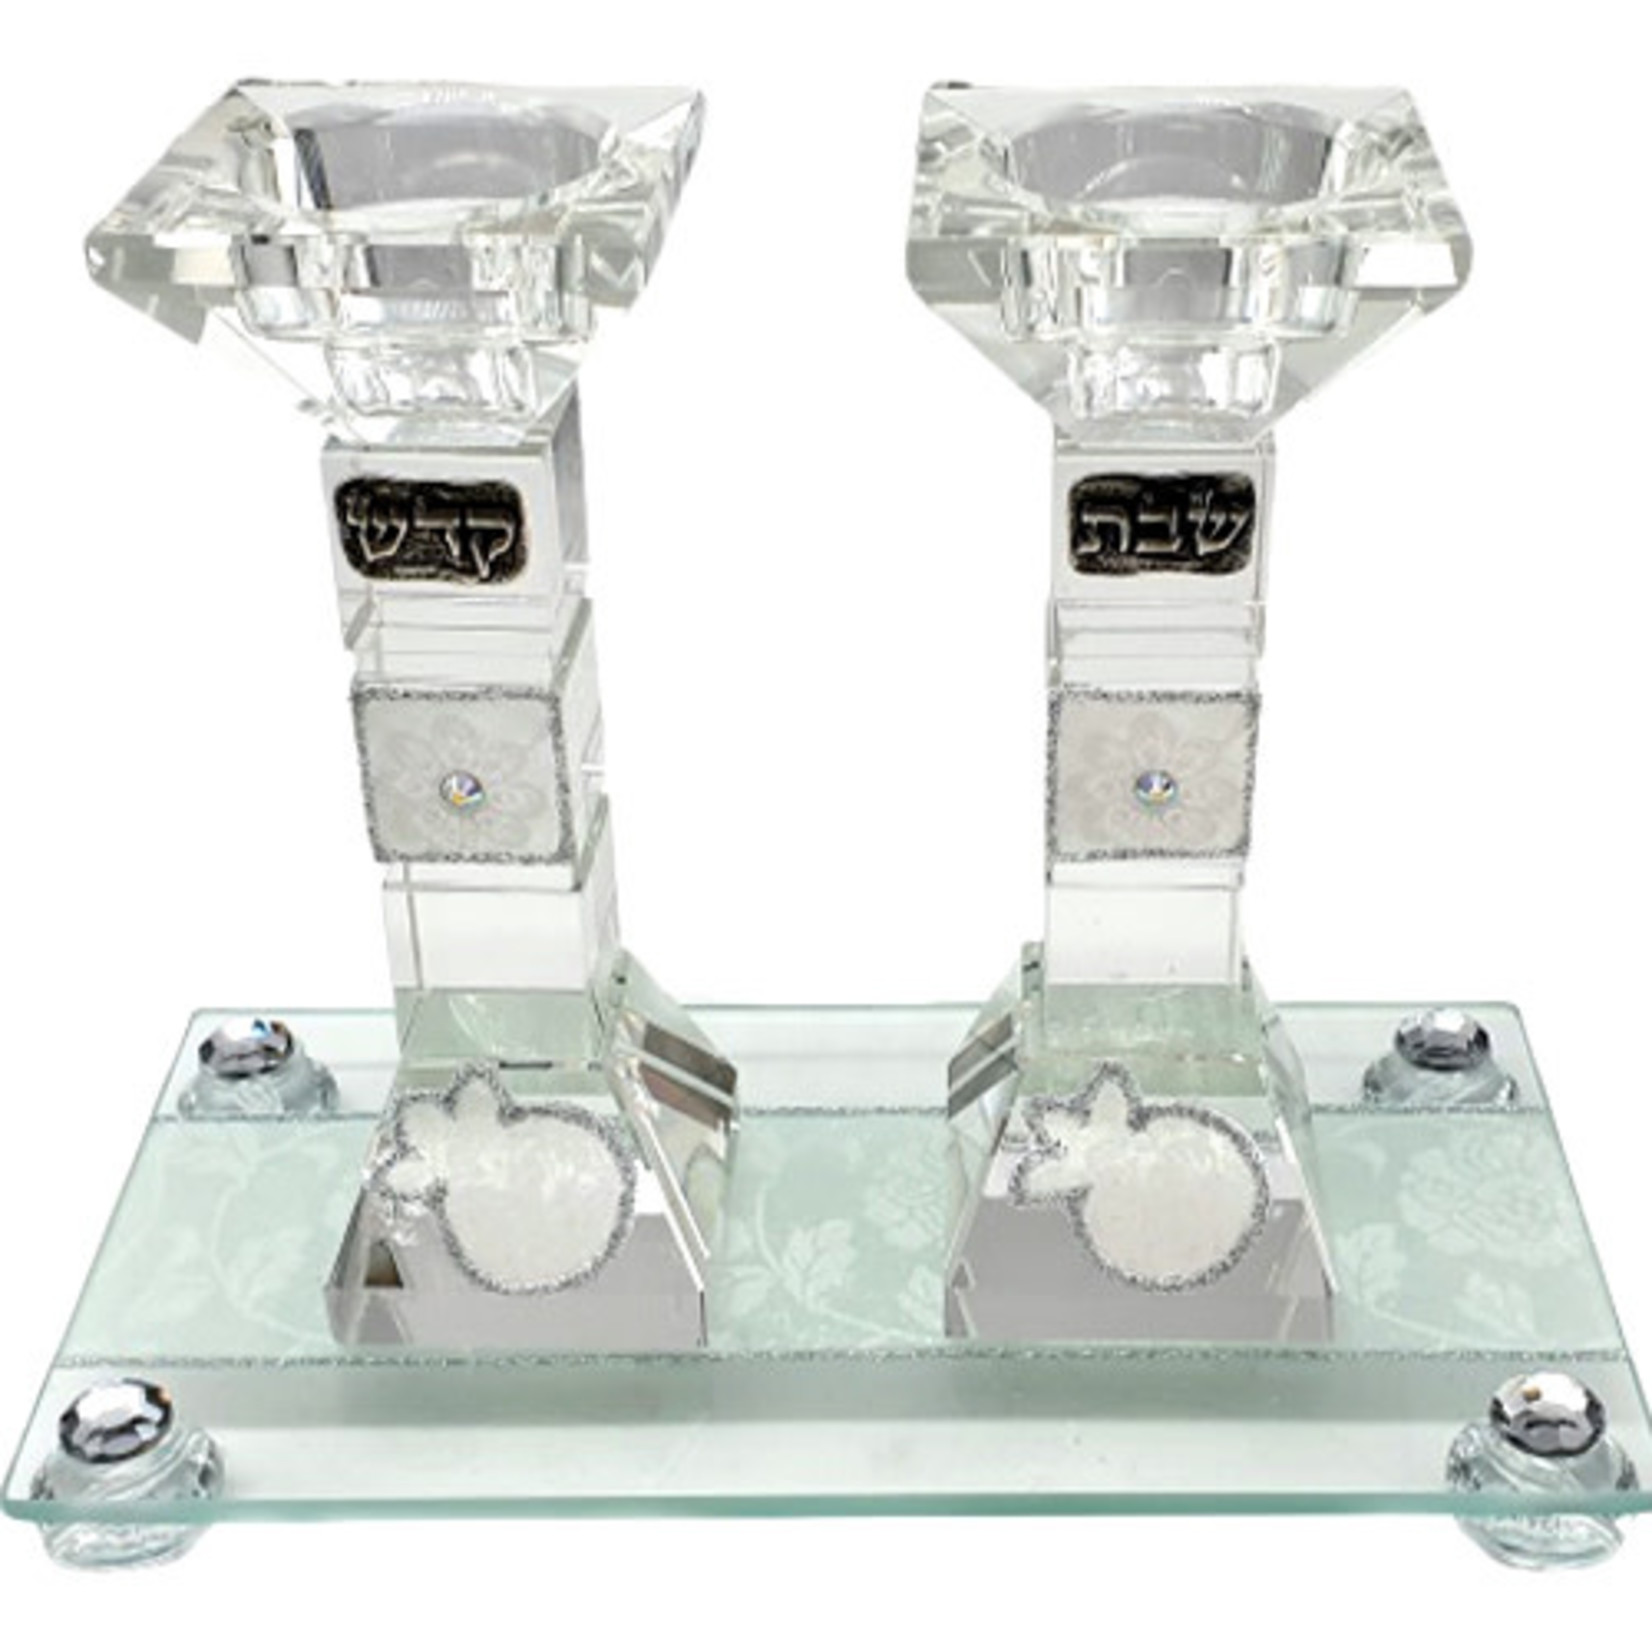 Crystal Candlesticks with Tray